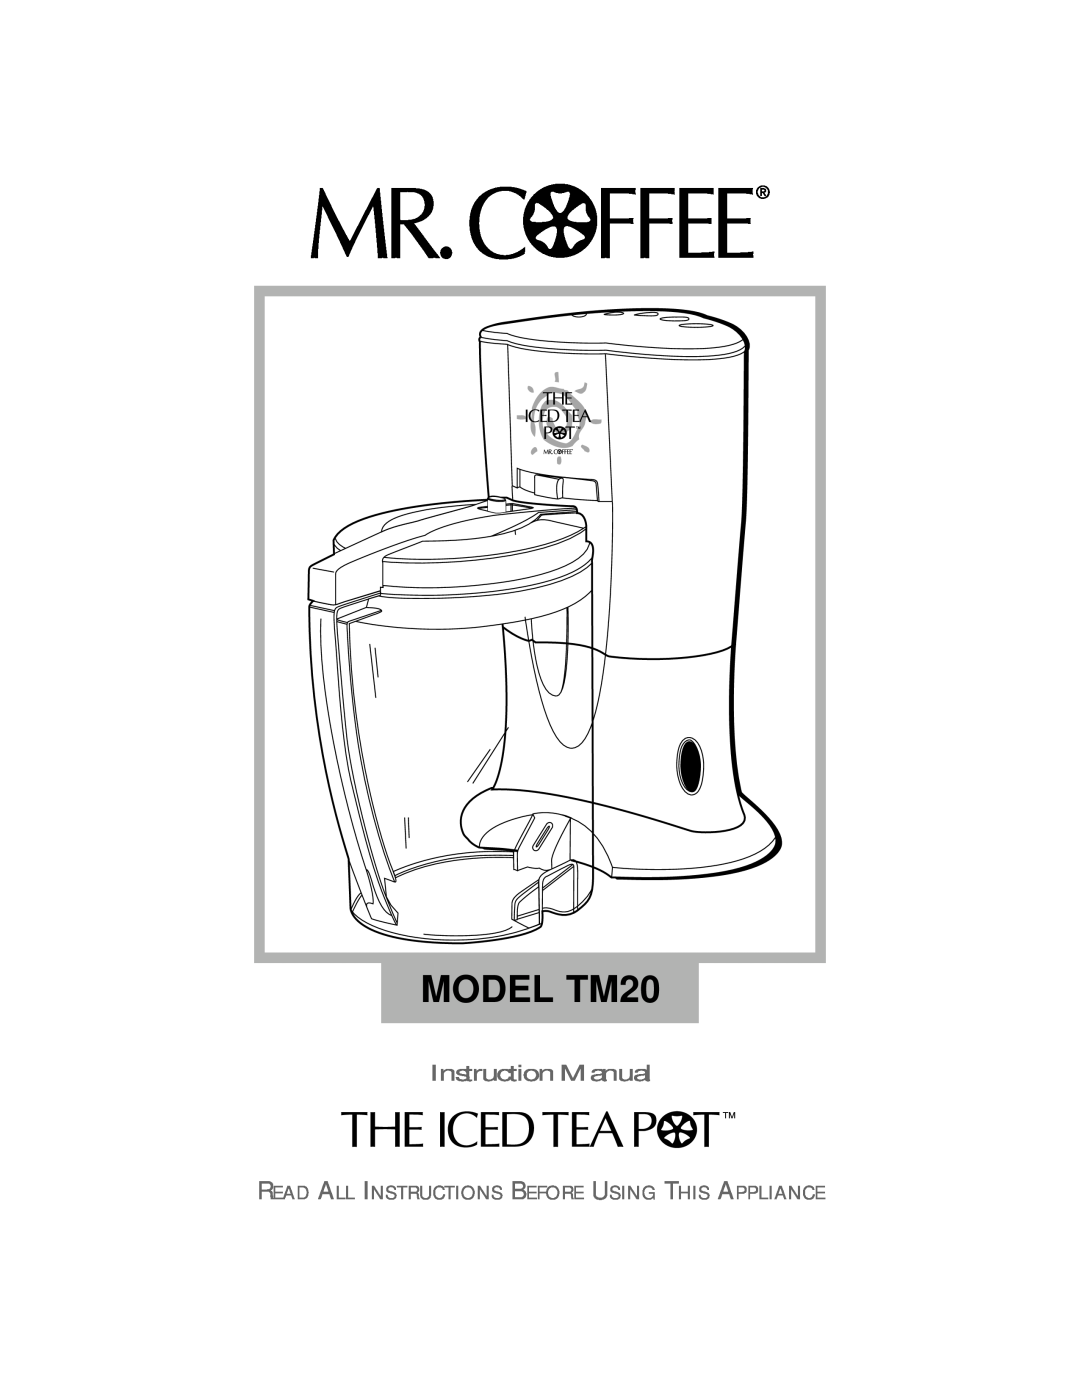 Mr. Coffee instruction manual MODEL TM20, Read All Instructions Before Using This Appliance 